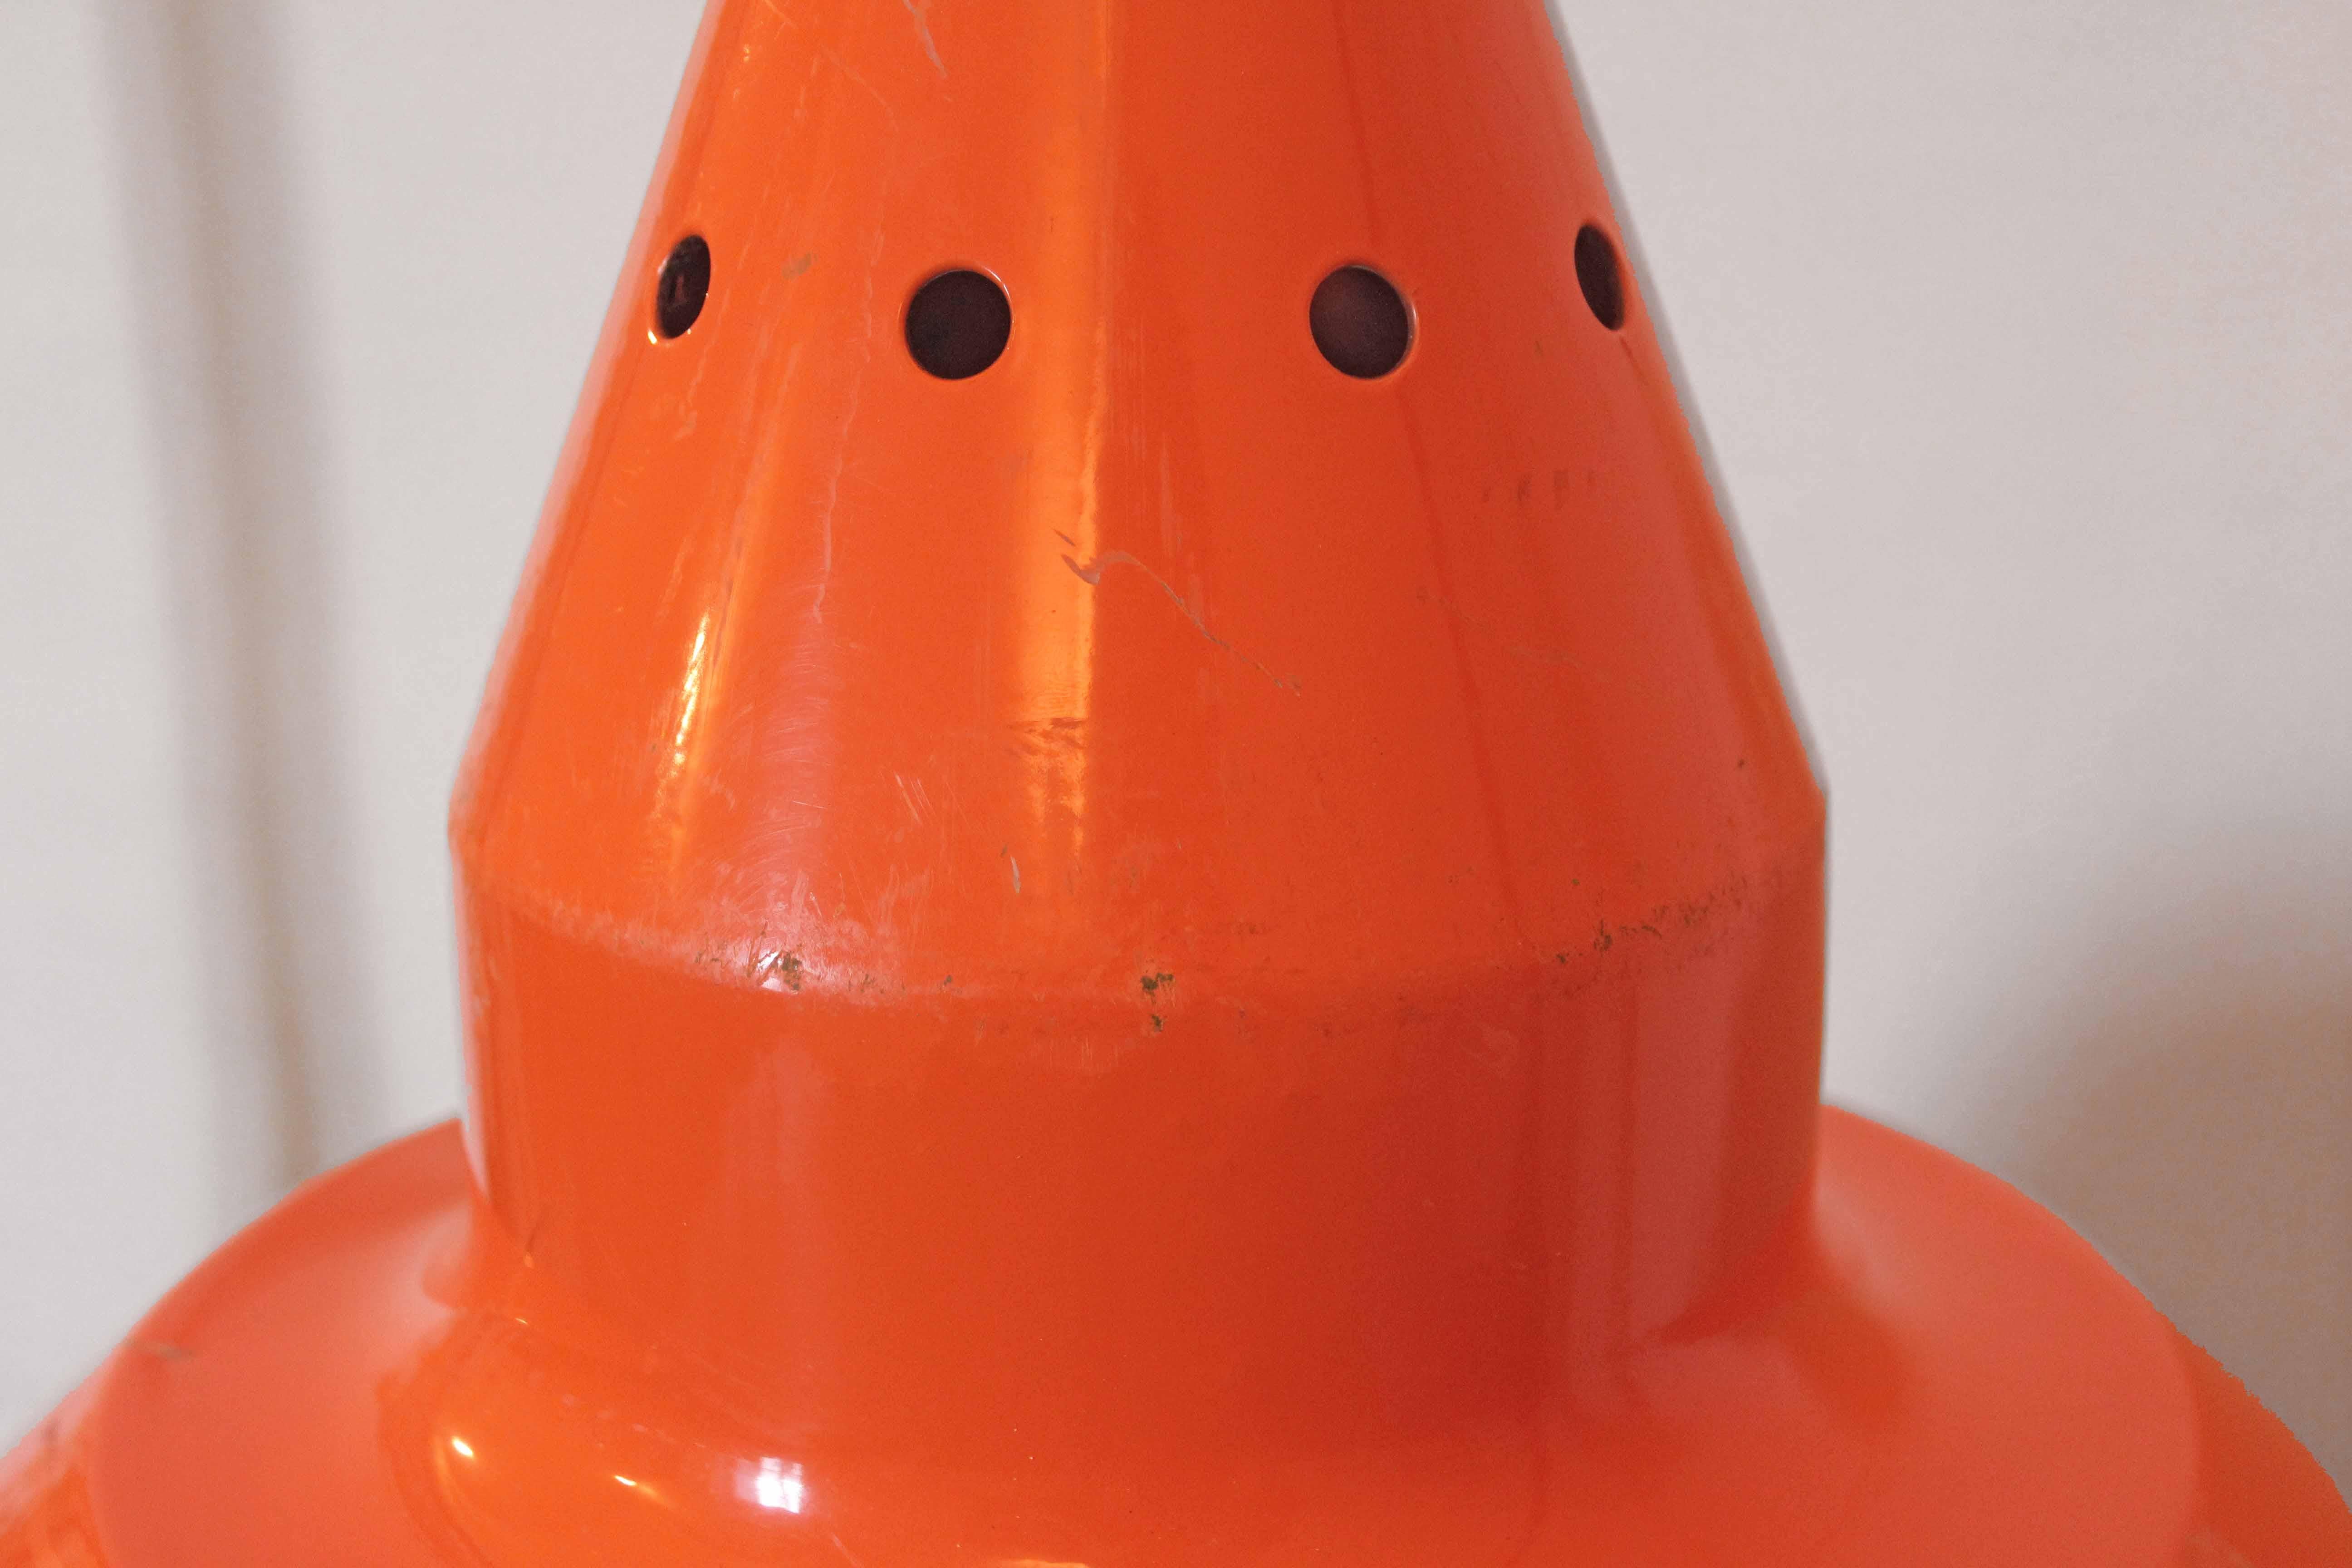 Industrial Orange Lamp, Italy 1970s.
Big industrial orange lampshade from the 1970s. Vintage design. In very good conditions with only few signs of time. 3 available.